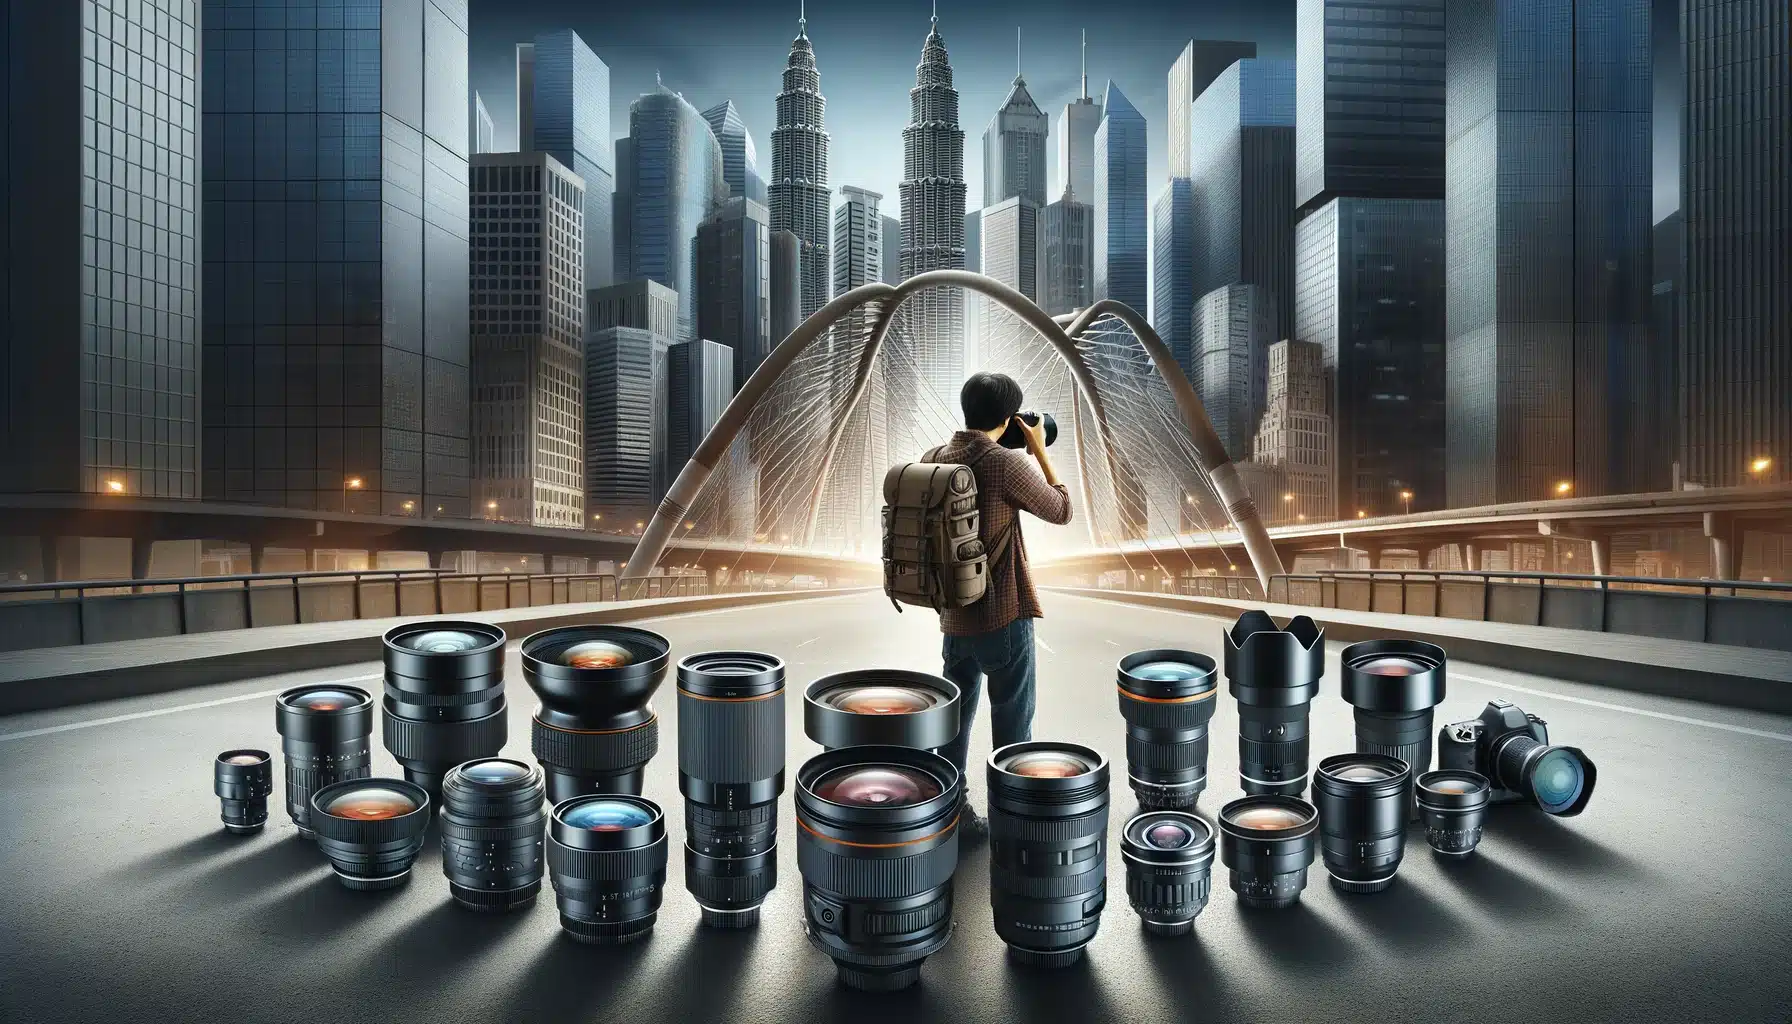 Architectural photographer in a city setting, taking photos of buildings, with dissimilar spectacles like wide-angle, telephoto, and fisheye horizon around.